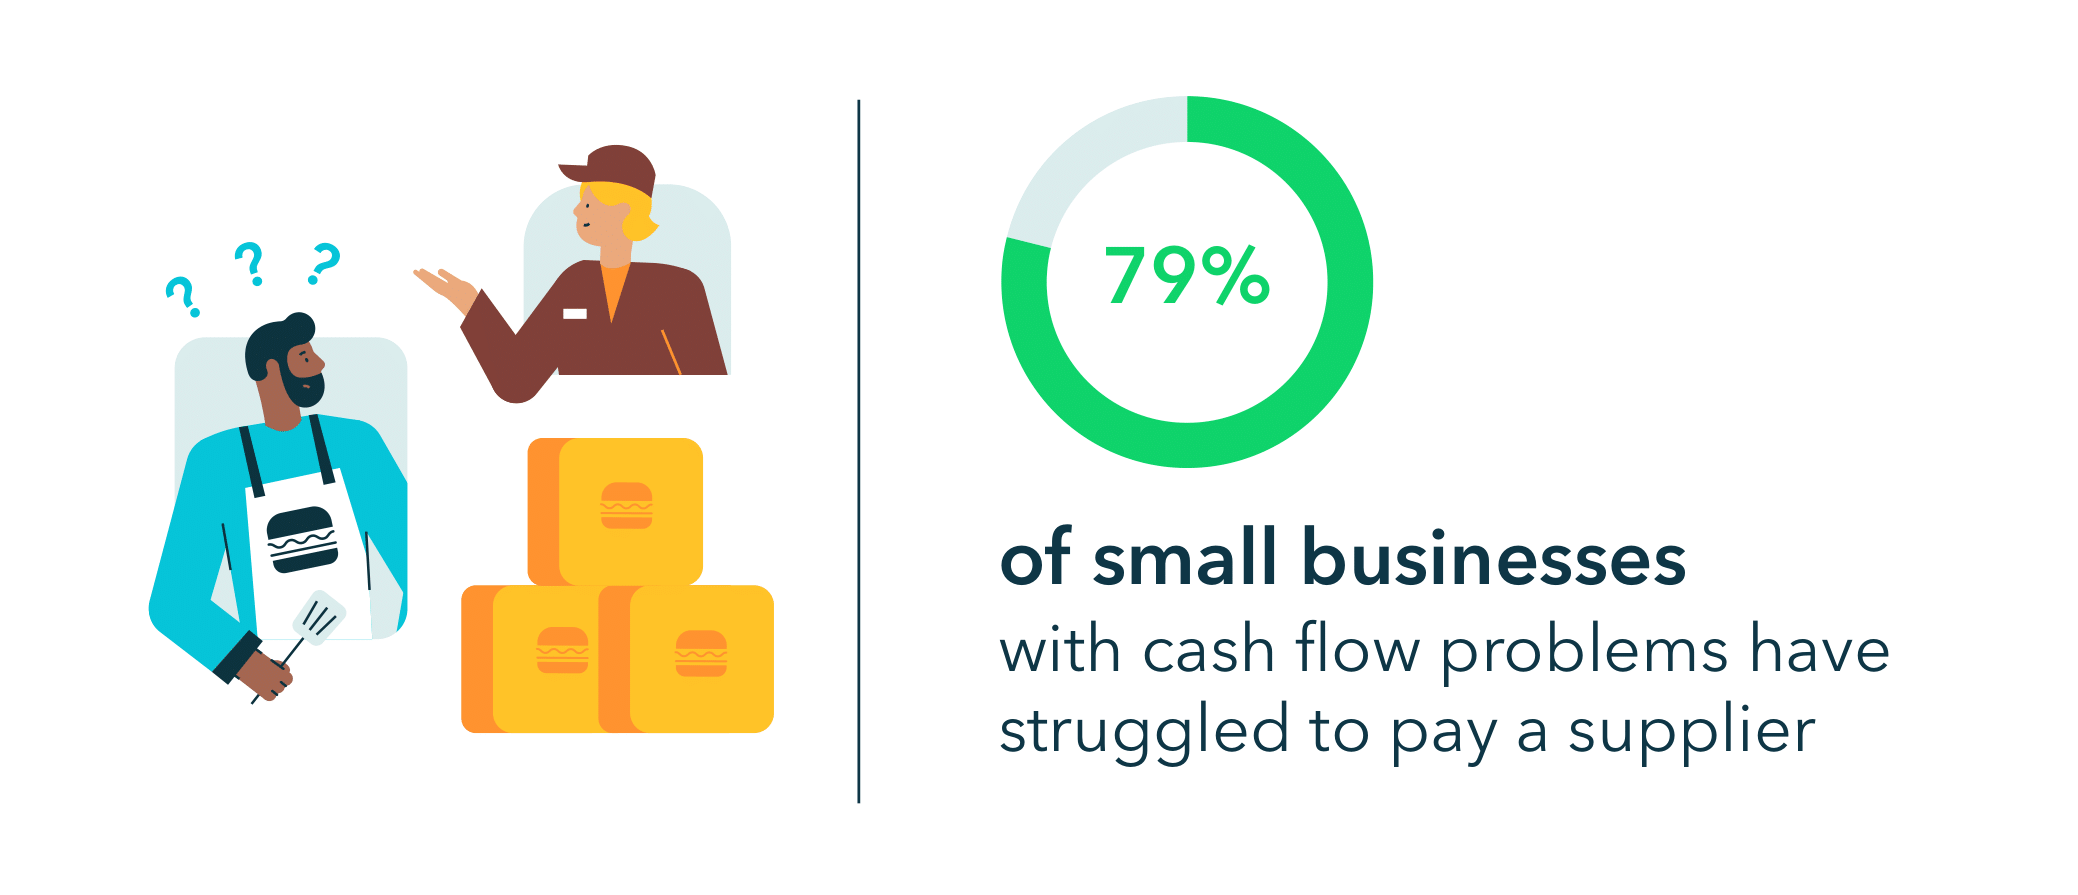 79% of small businesses with cash flow problems have struggled to pay a supplier.